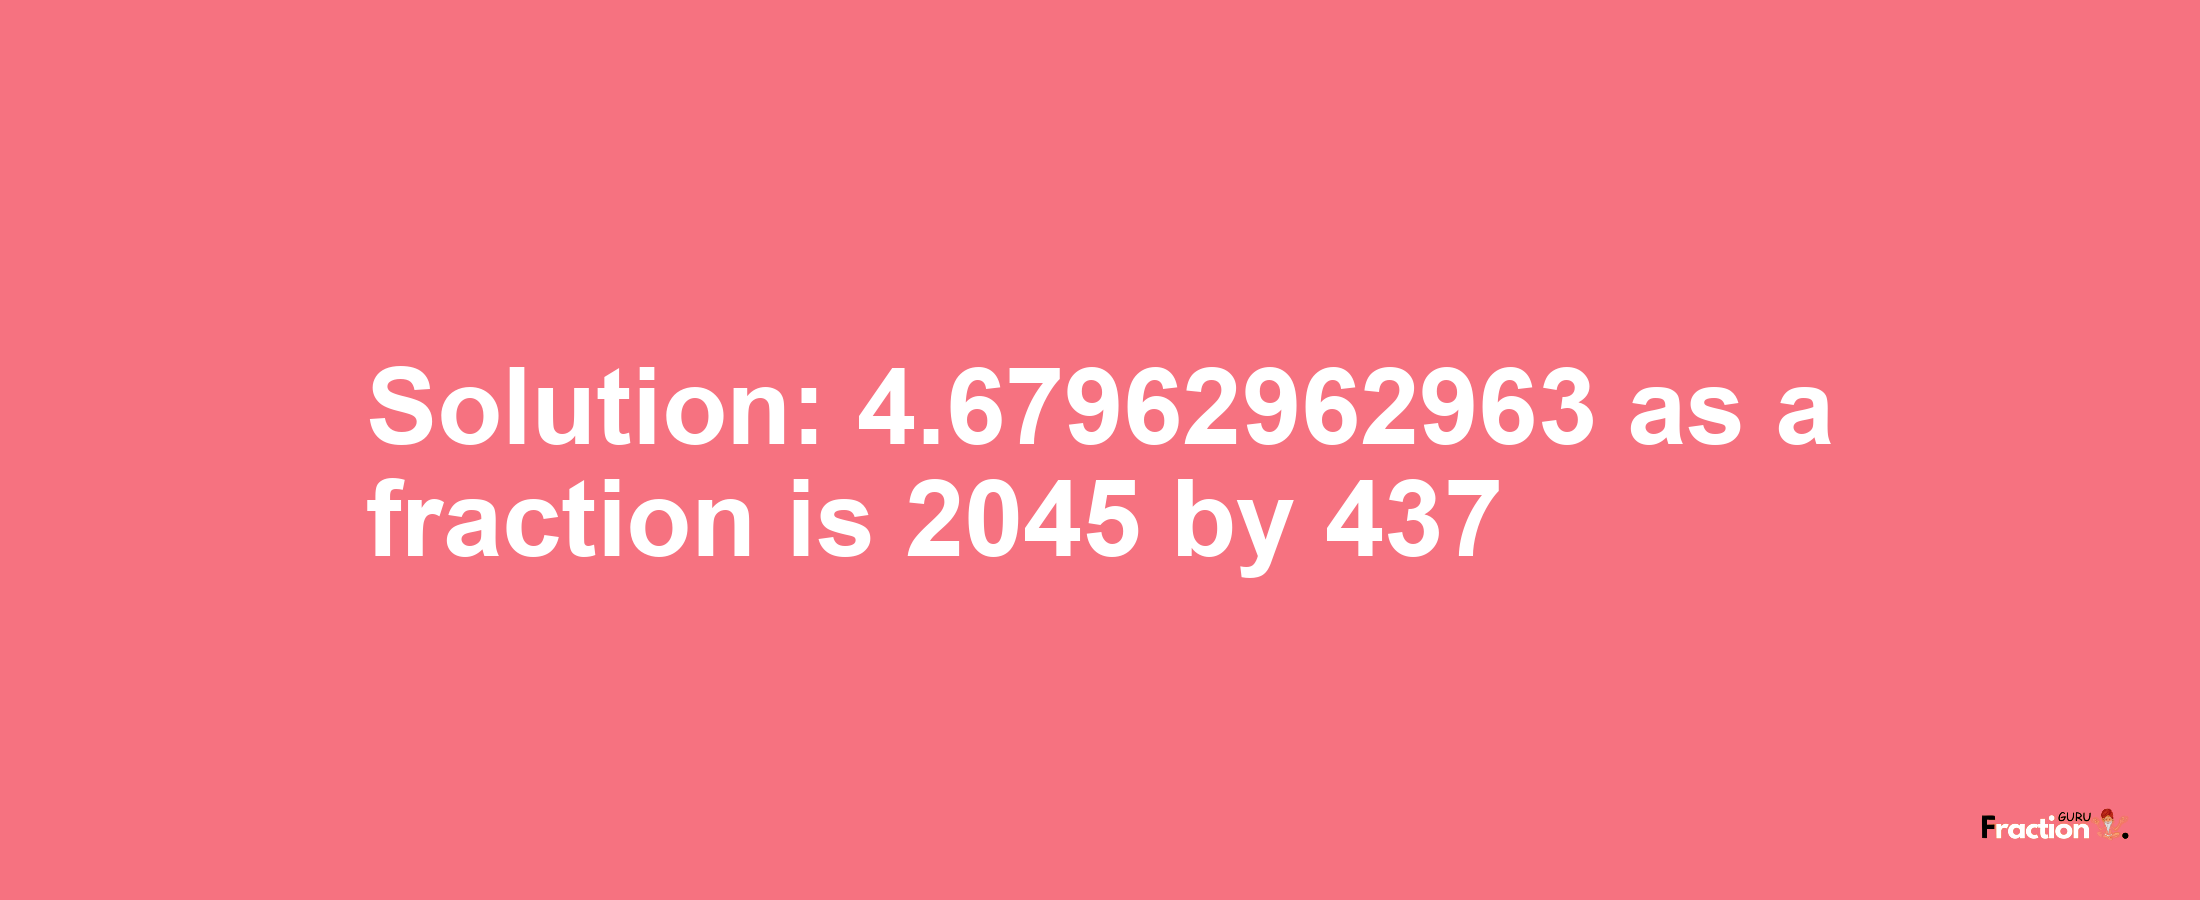 Solution:4.67962962963 as a fraction is 2045/437